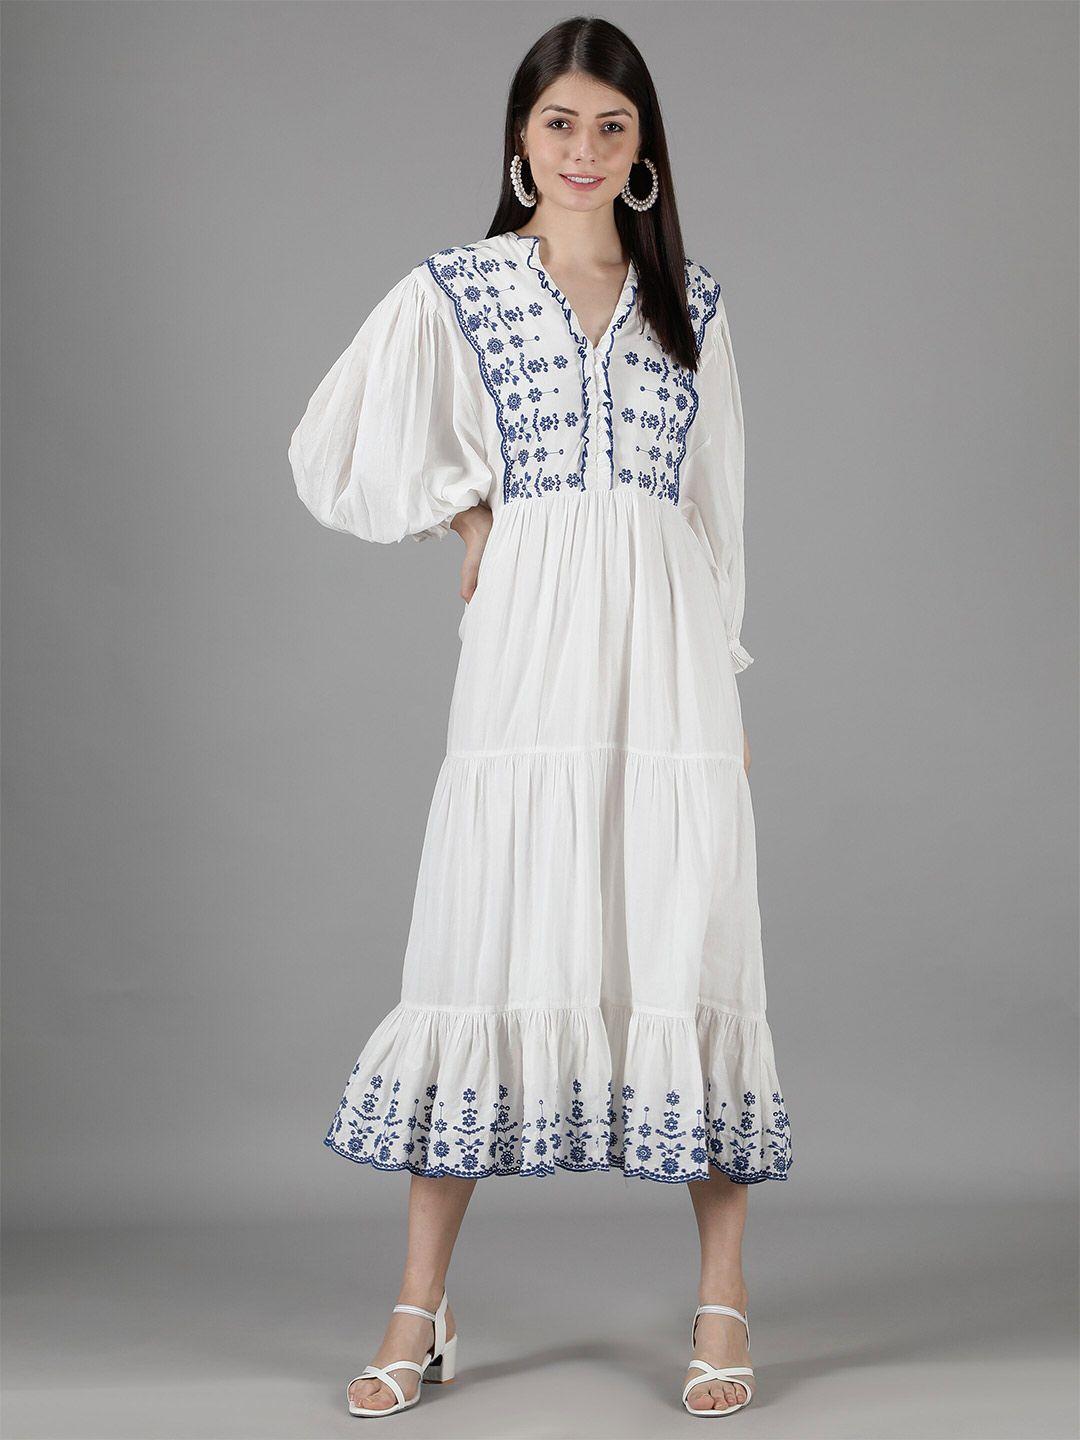 amagyaa women white & blue floral embroidered a-line midi cotton dress